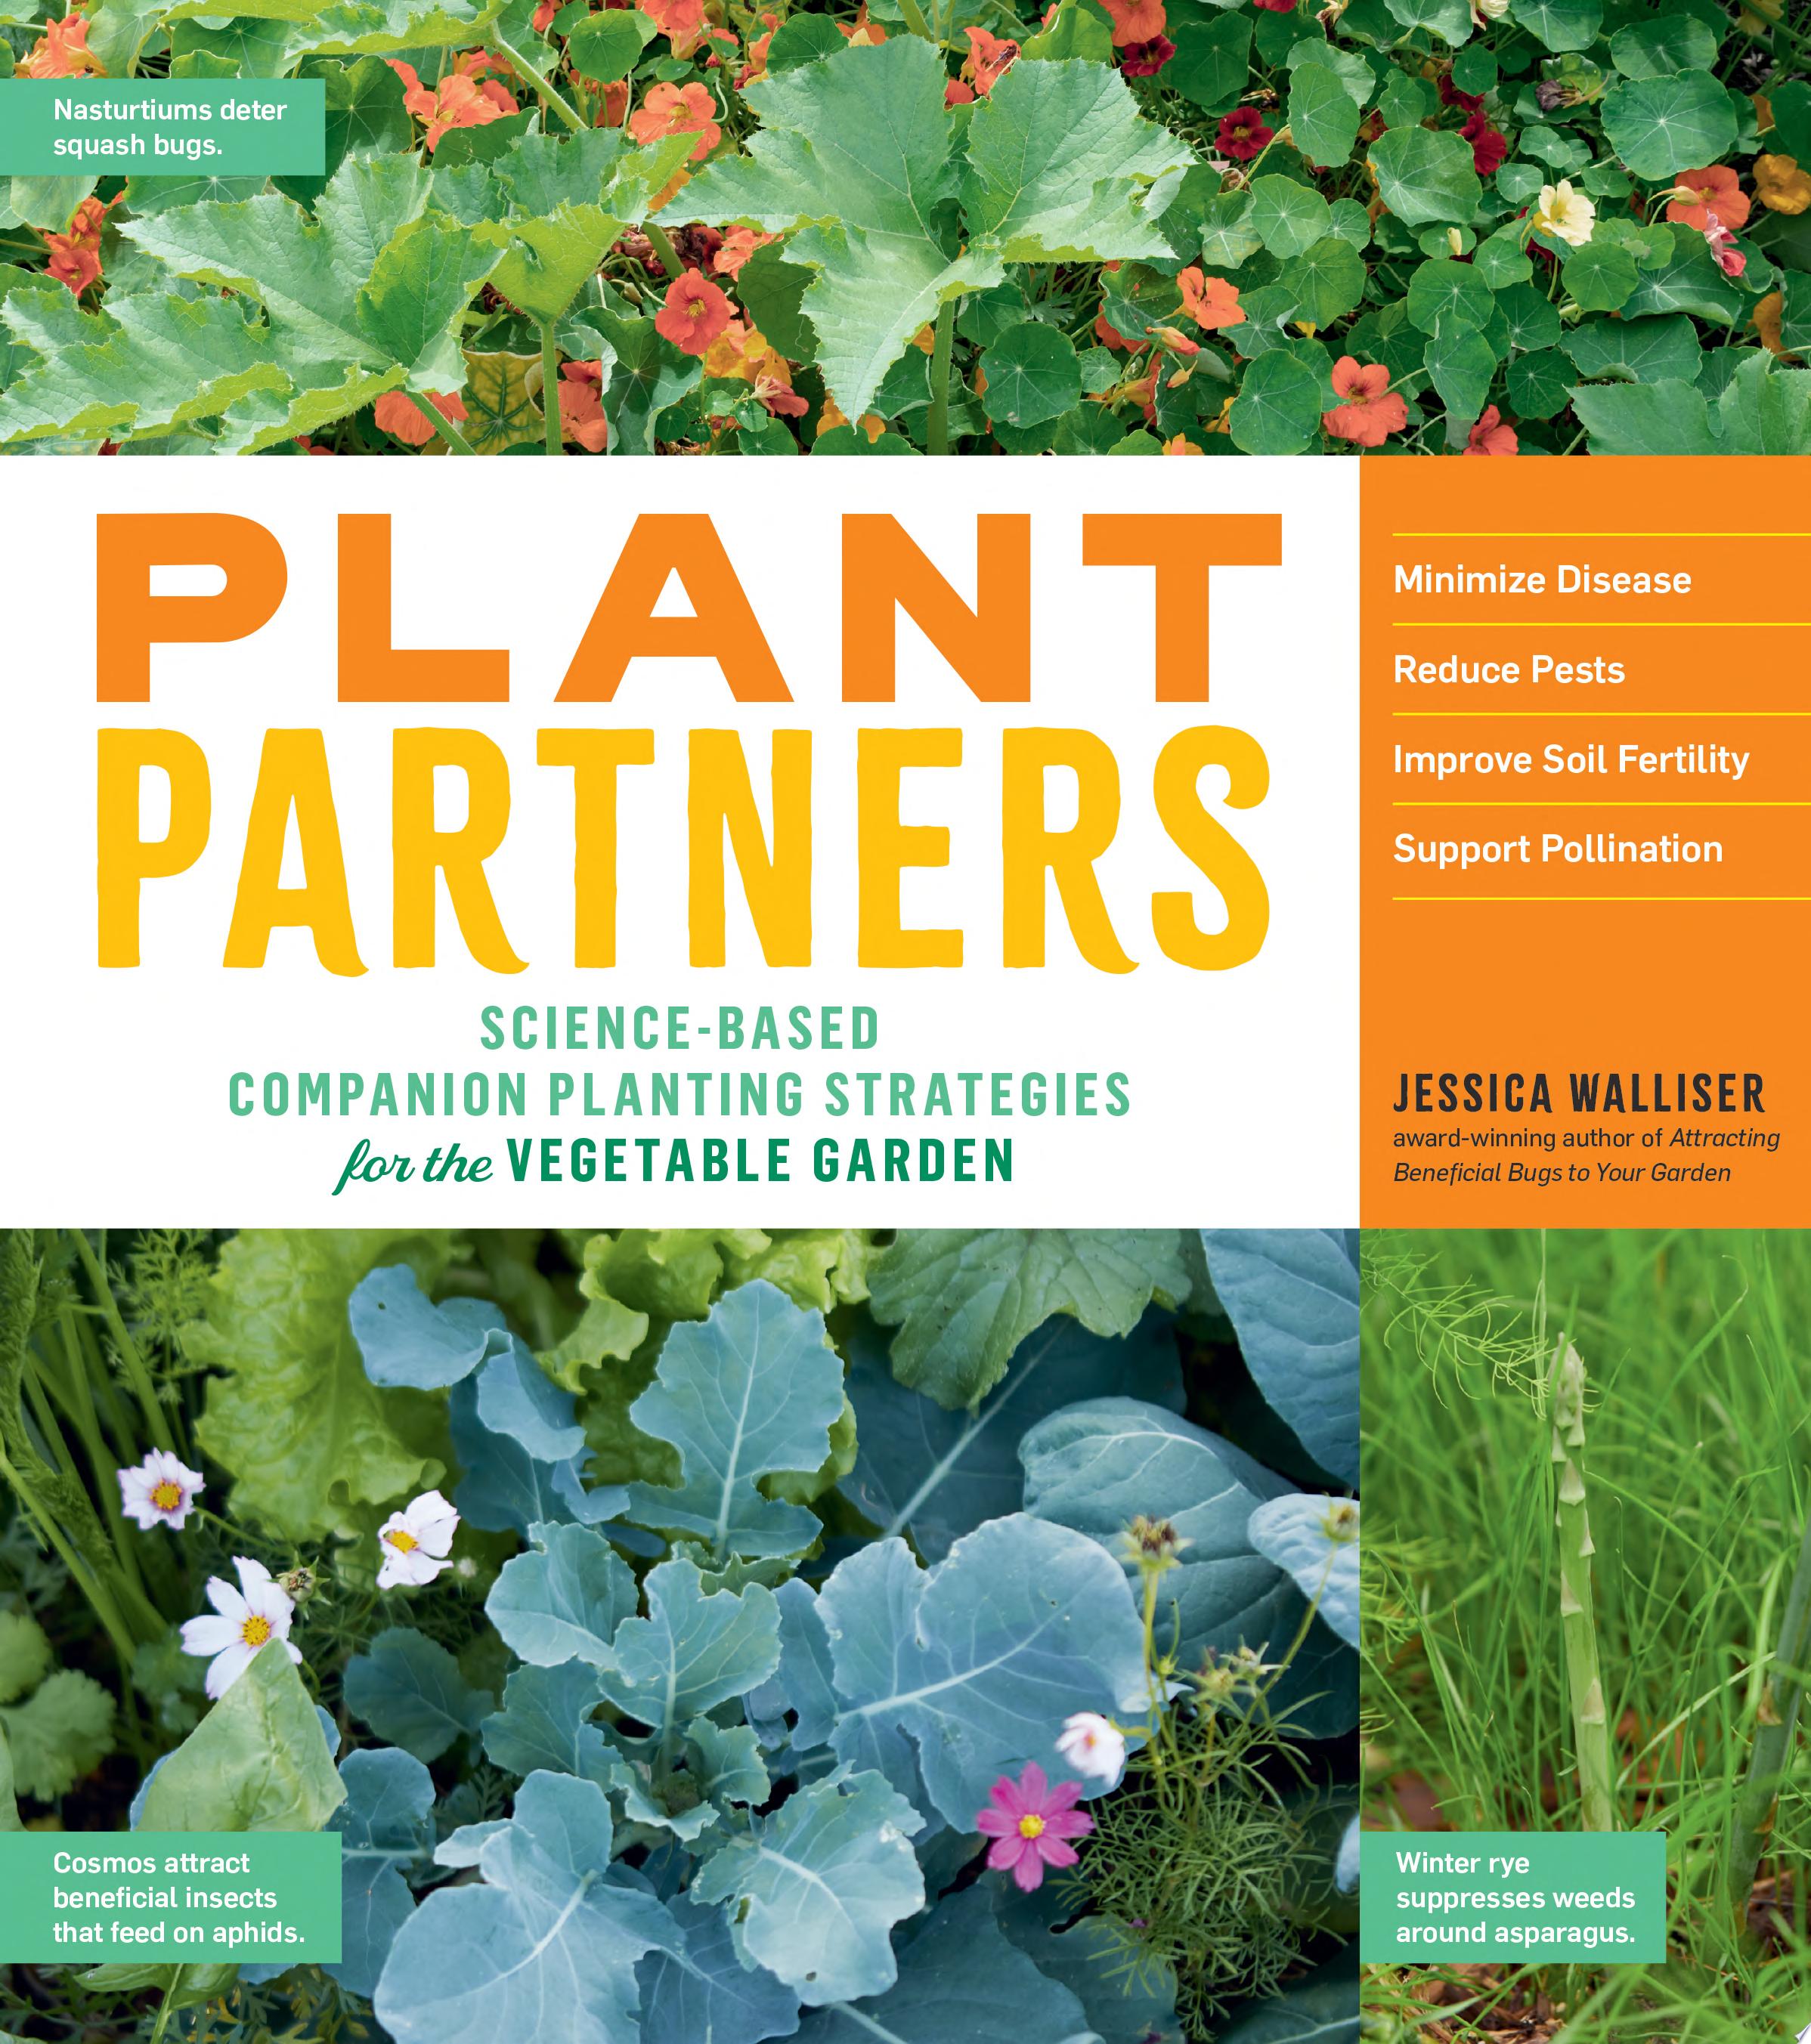 Image for "Plant Partners"